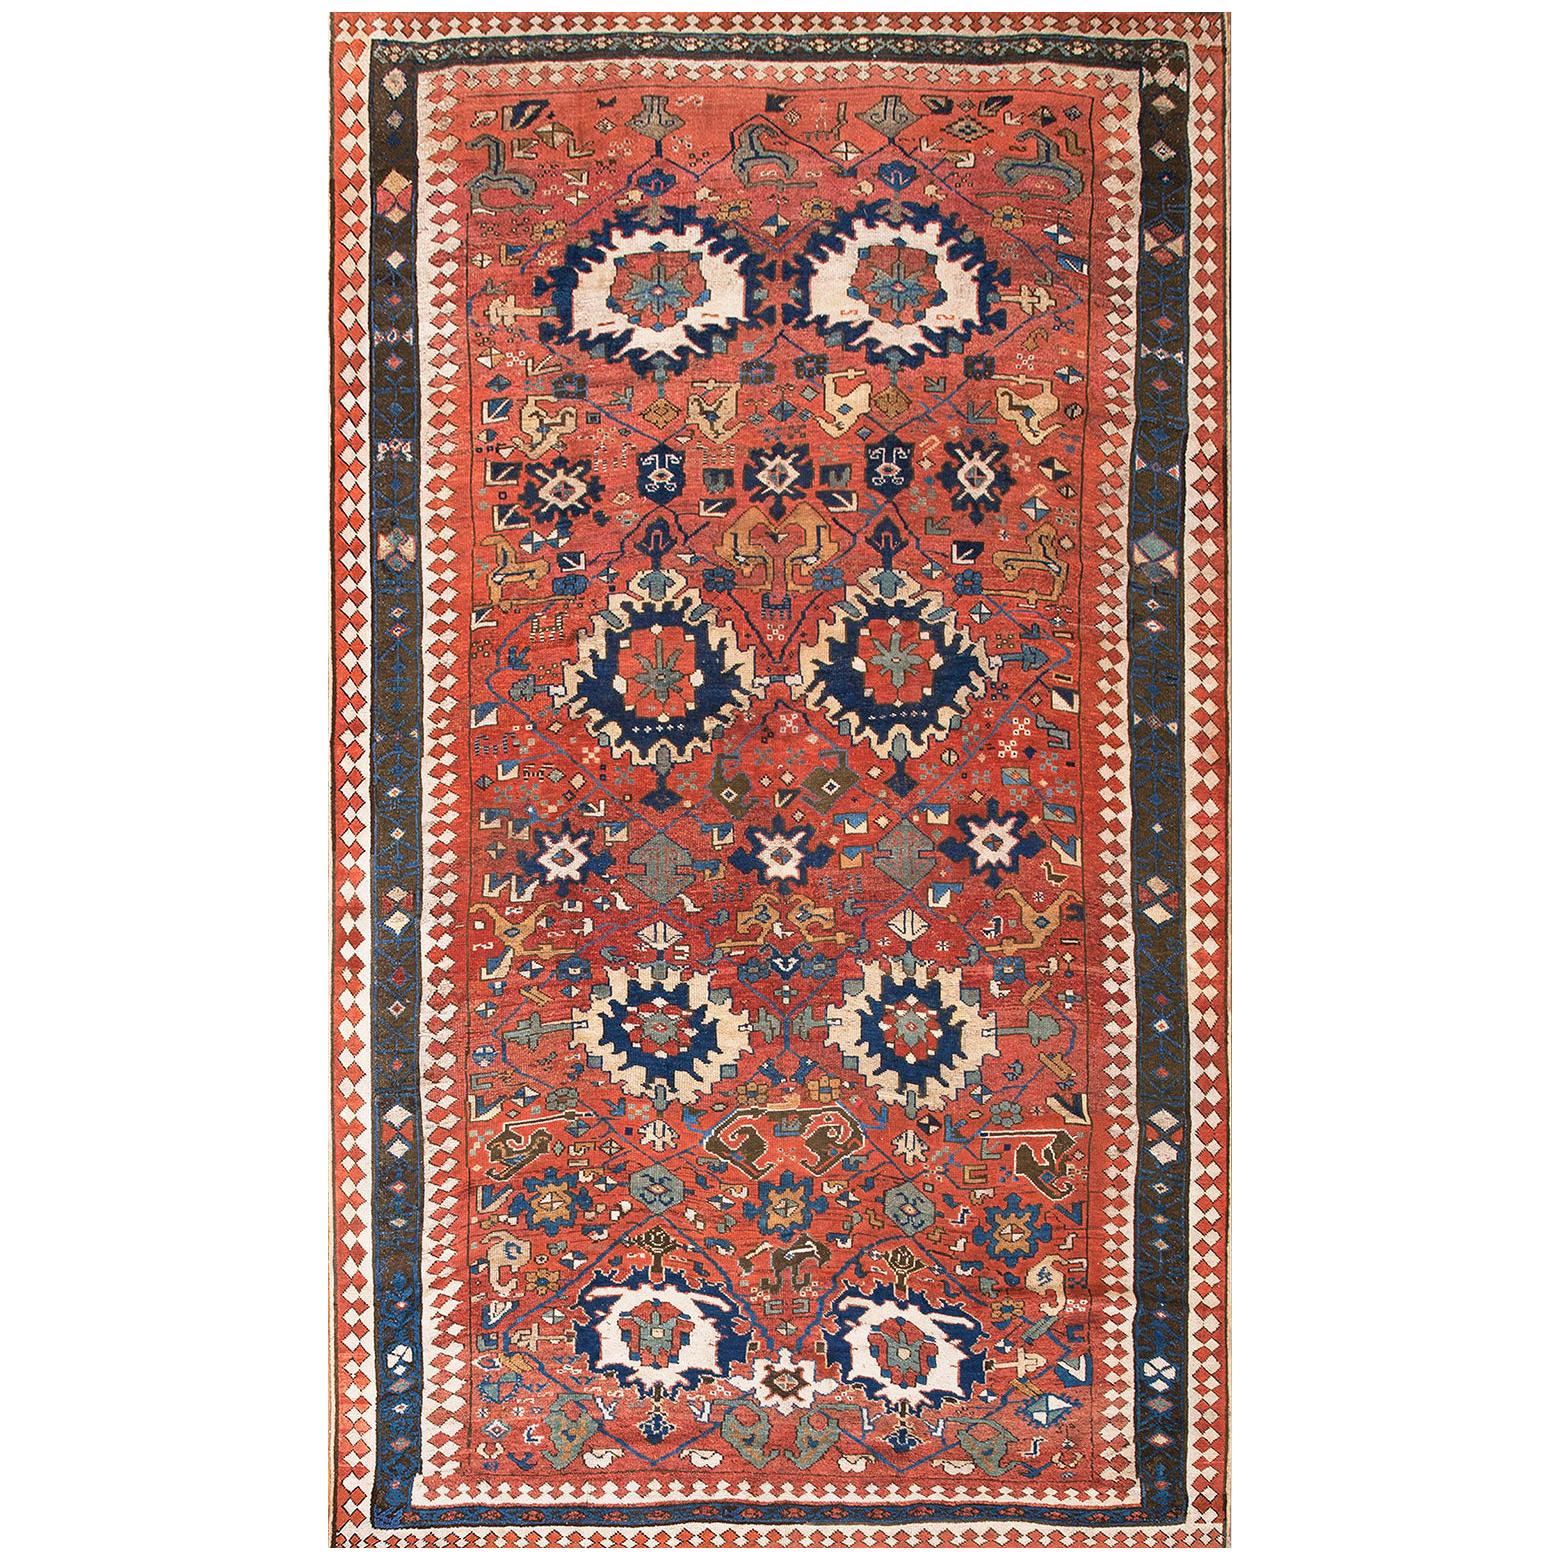 Mid 19th Century N.W. Persian Carpet ( 6'8" X 11'9" - 204 X 368 ) For Sale